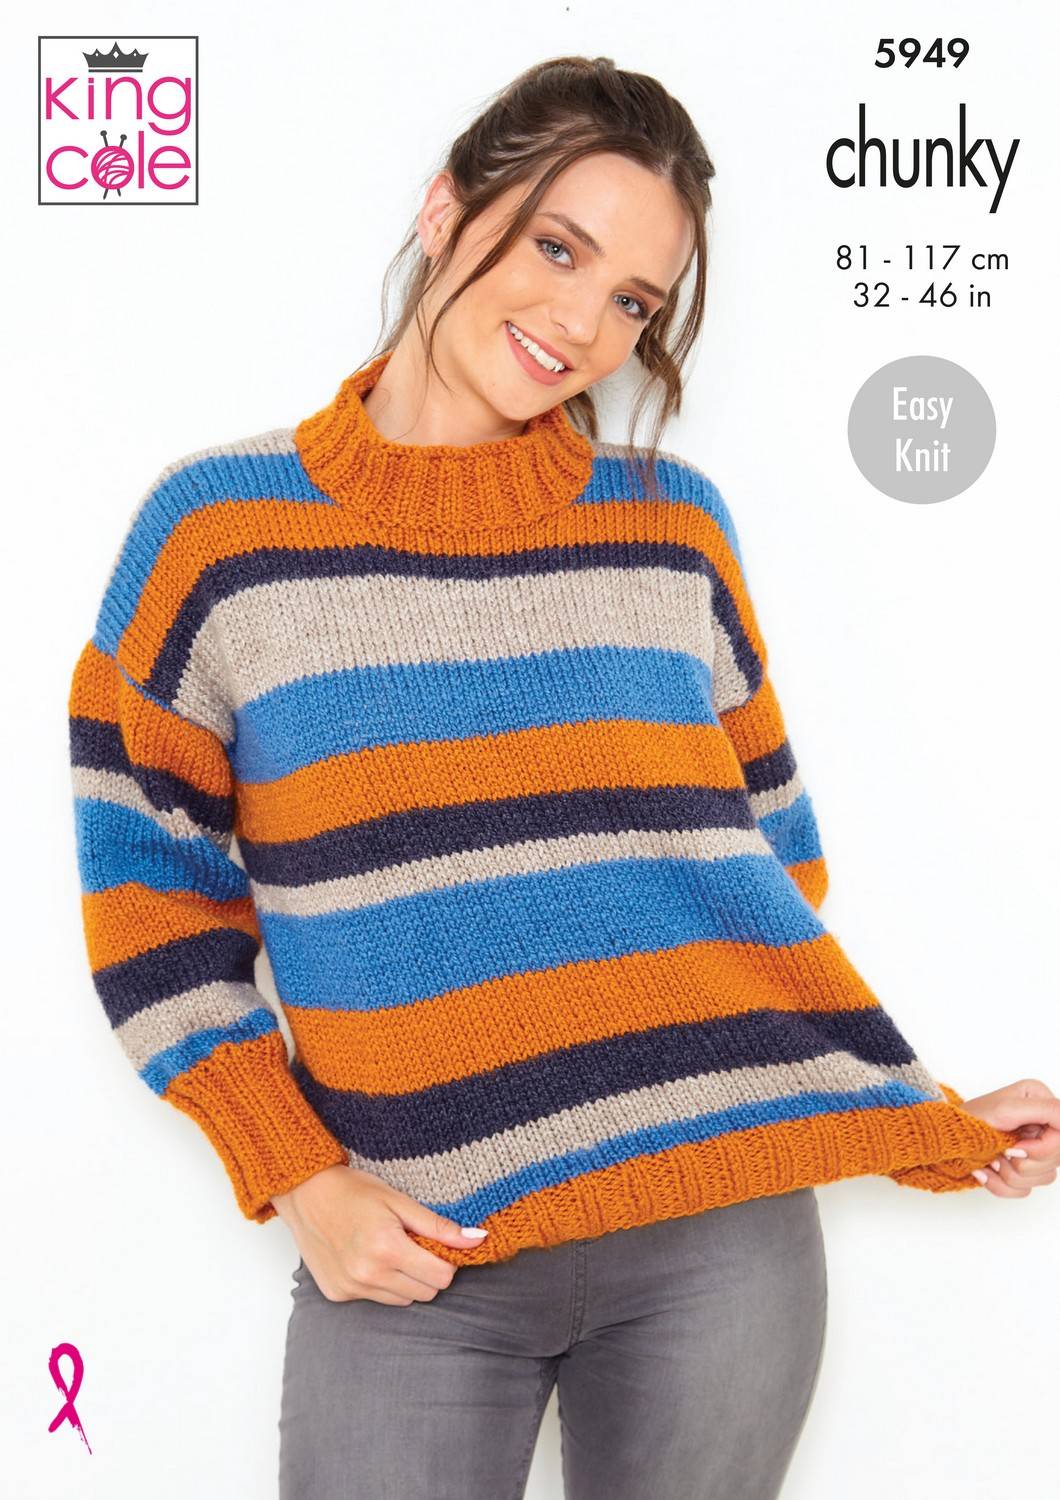 Sweaters in King Cole Big Value Chunky (5949) | The Knitting Network